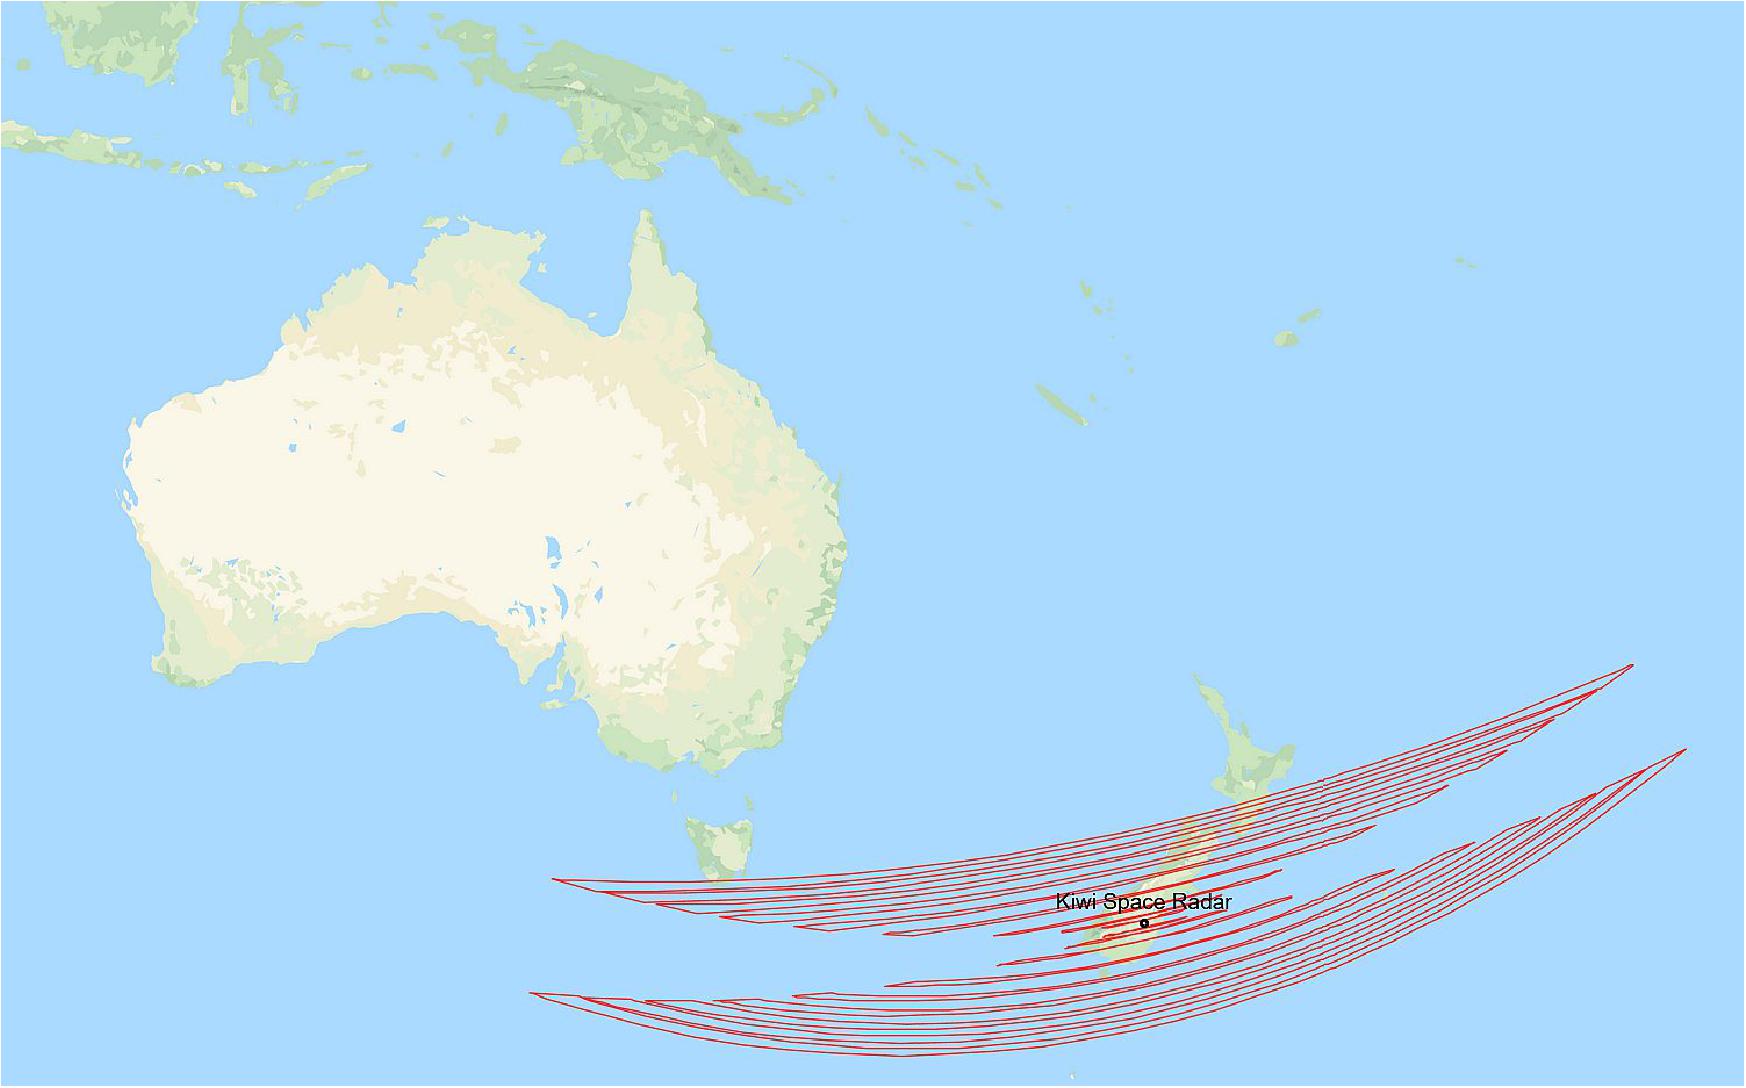 Figure 19: Location of the Kiwi Space Radar in New Zealand (image credit: LeoLabs)